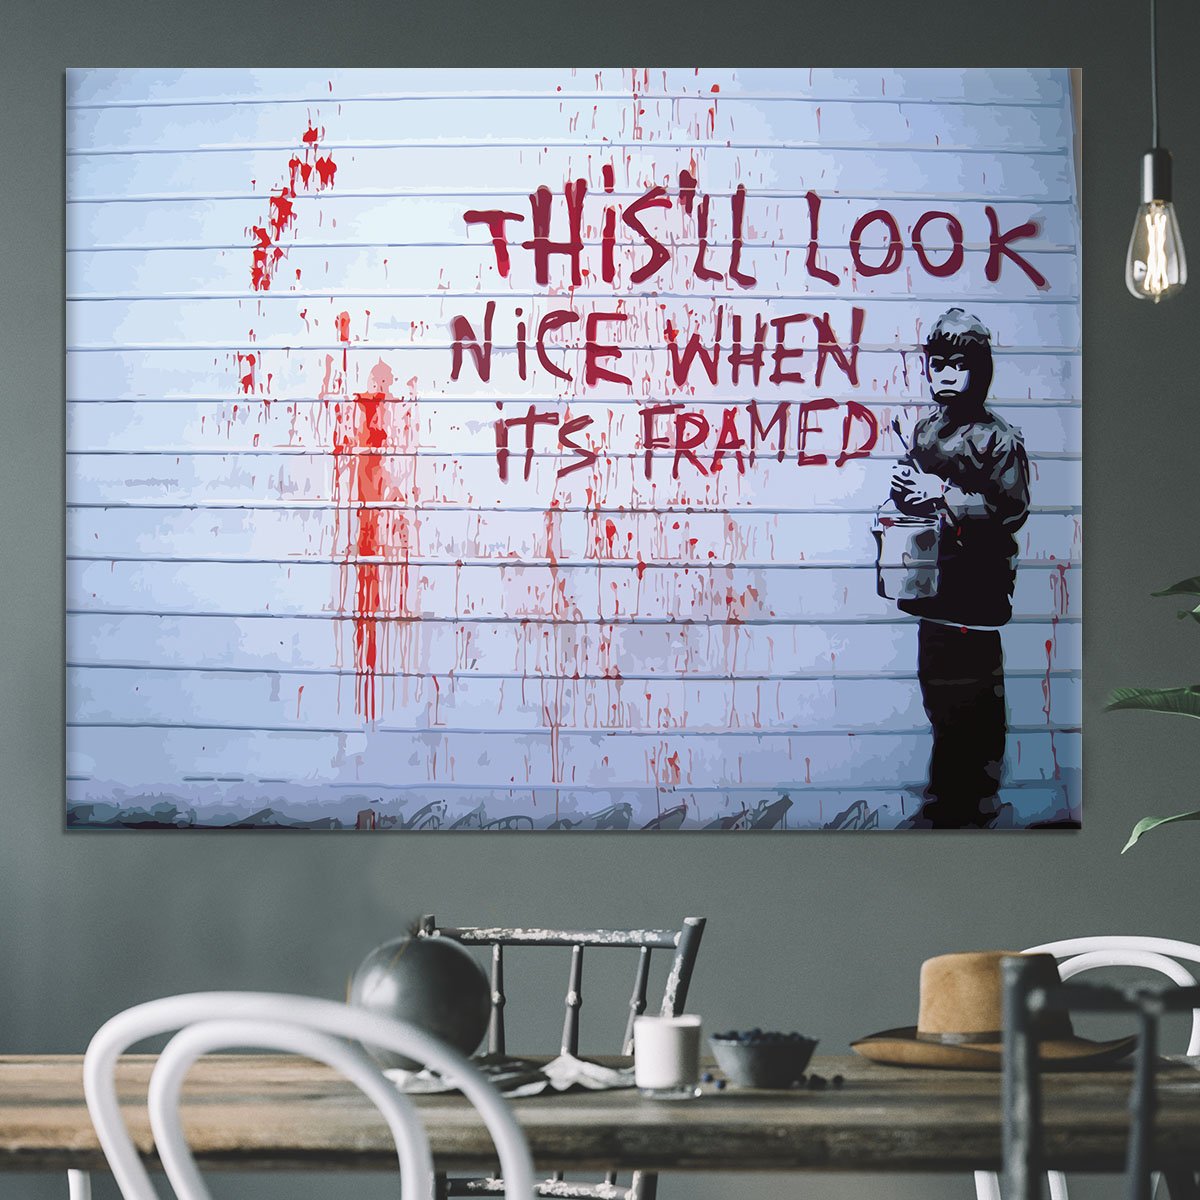 Banksy When Its Framed Canvas Print or Poster